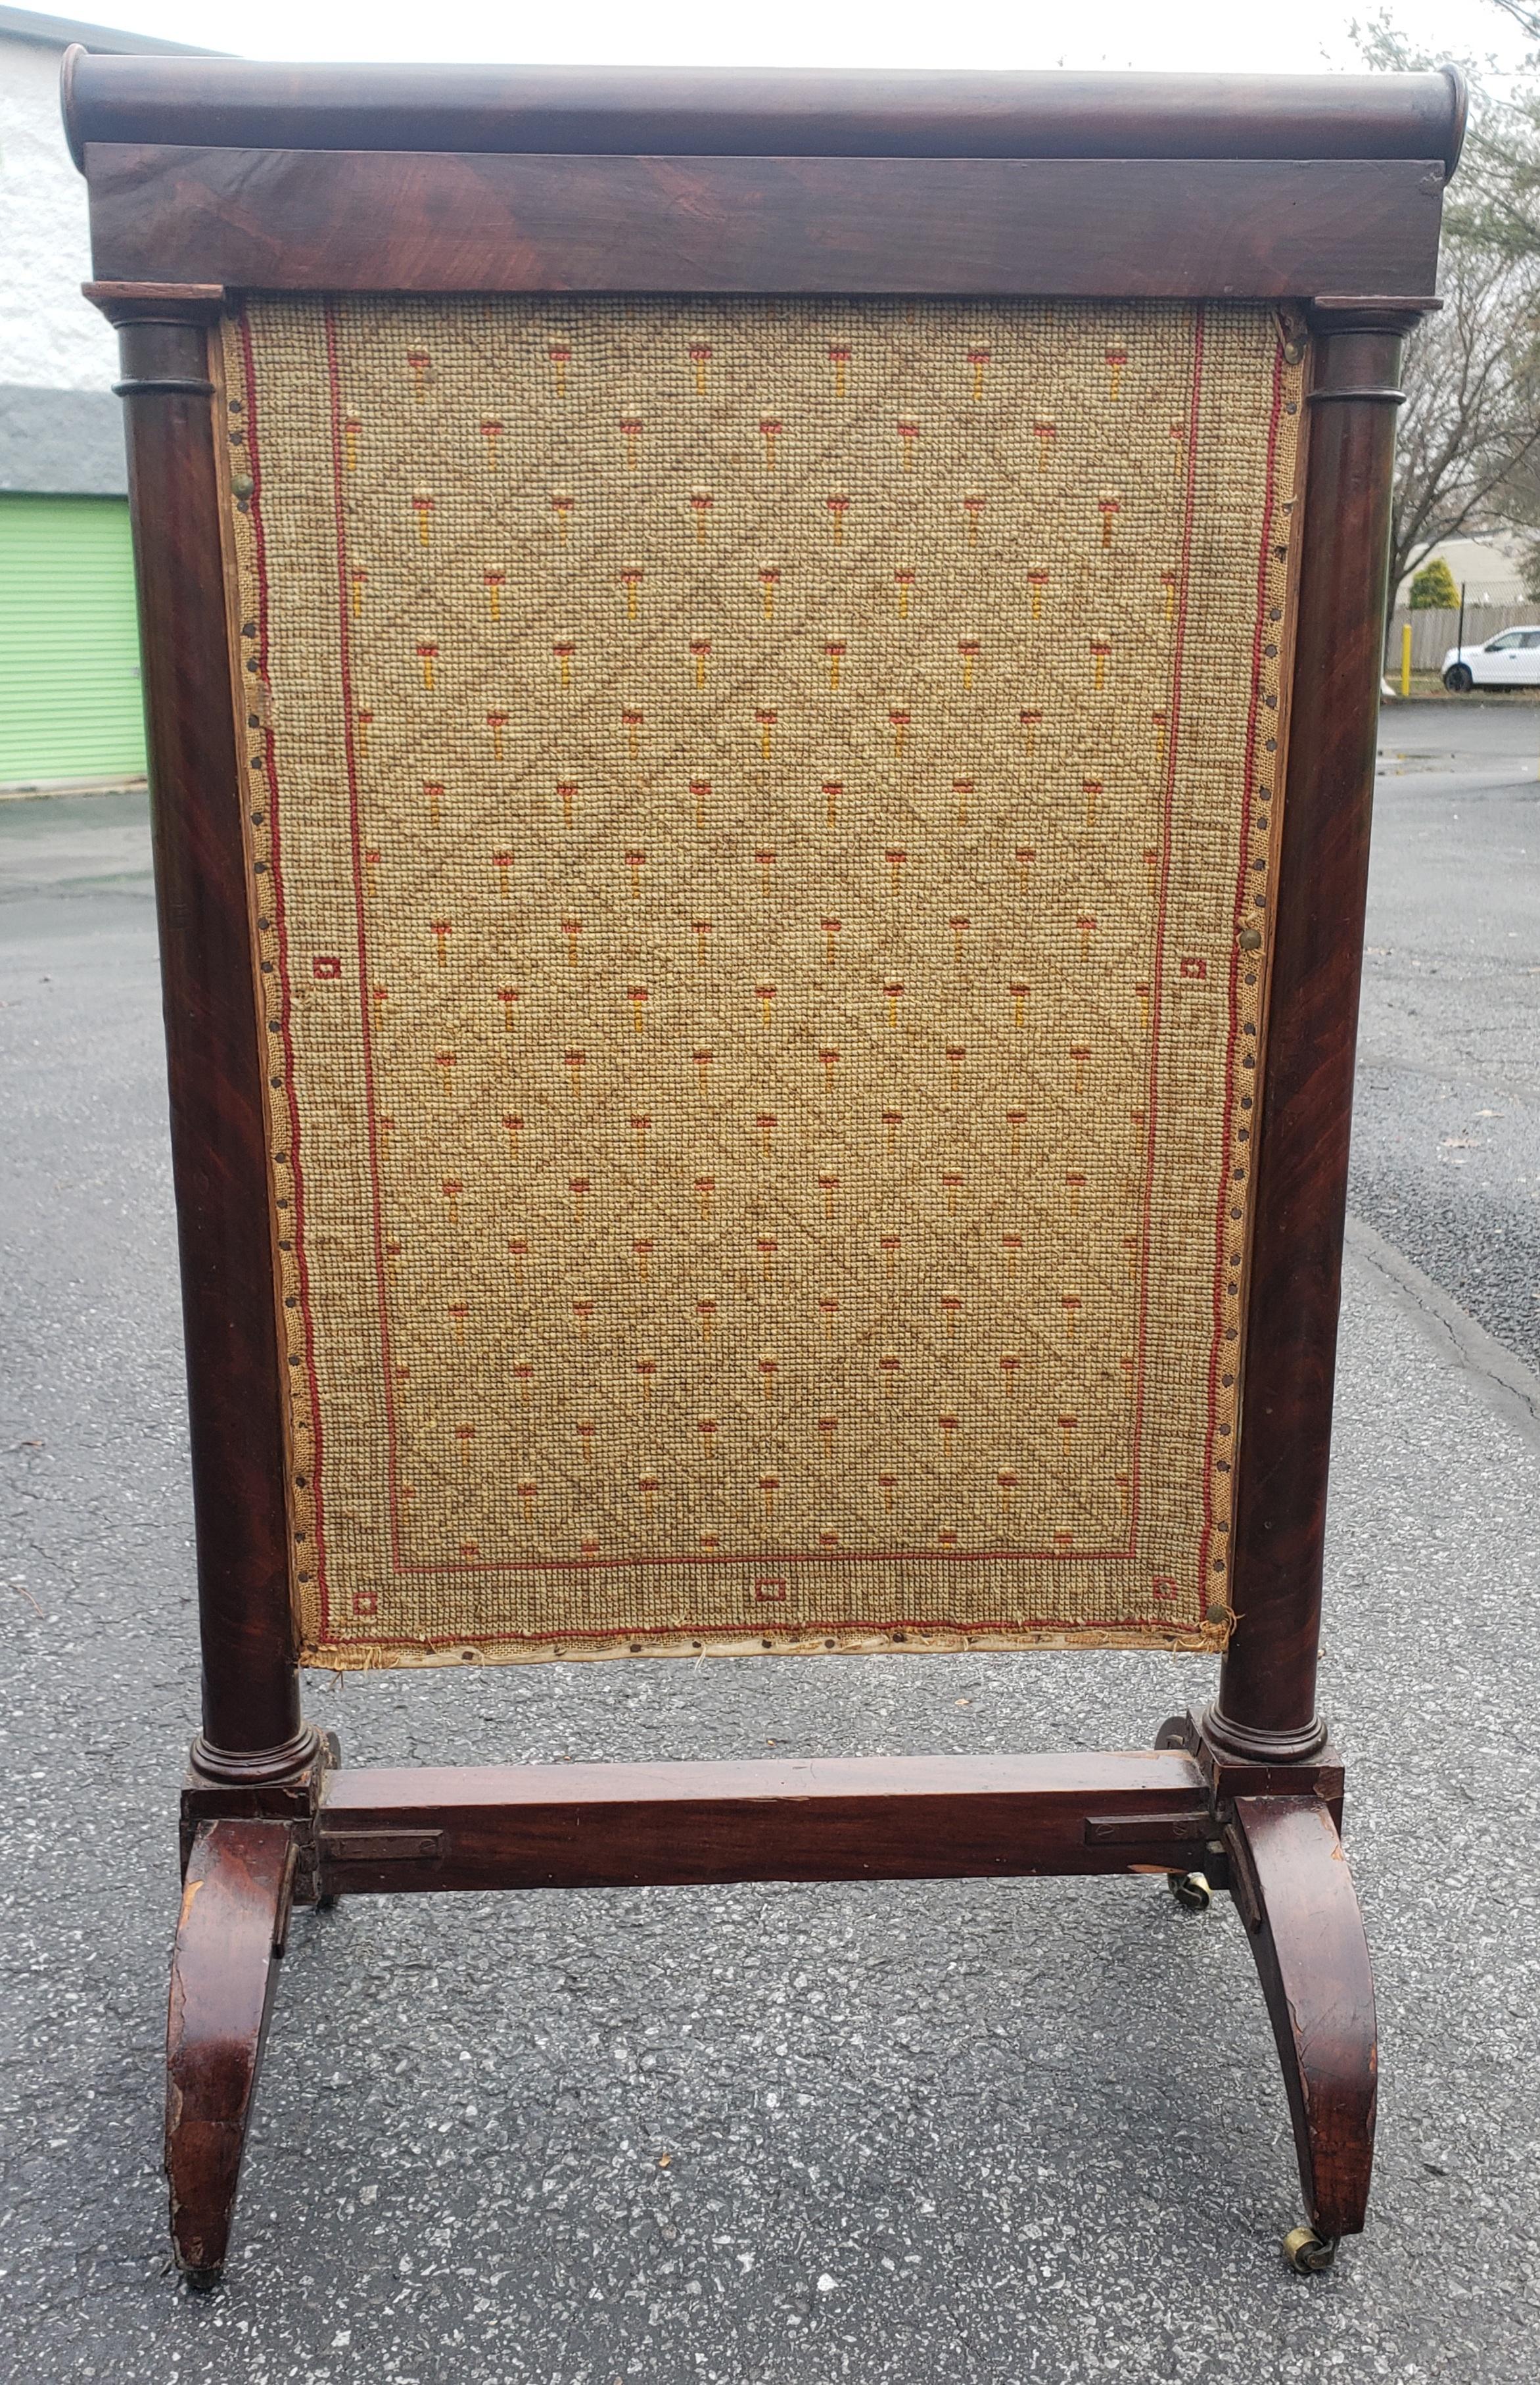 19th Century American Empire Mahogany and Needlepoint Fire Screen on Wheels In Good Condition For Sale In Germantown, MD